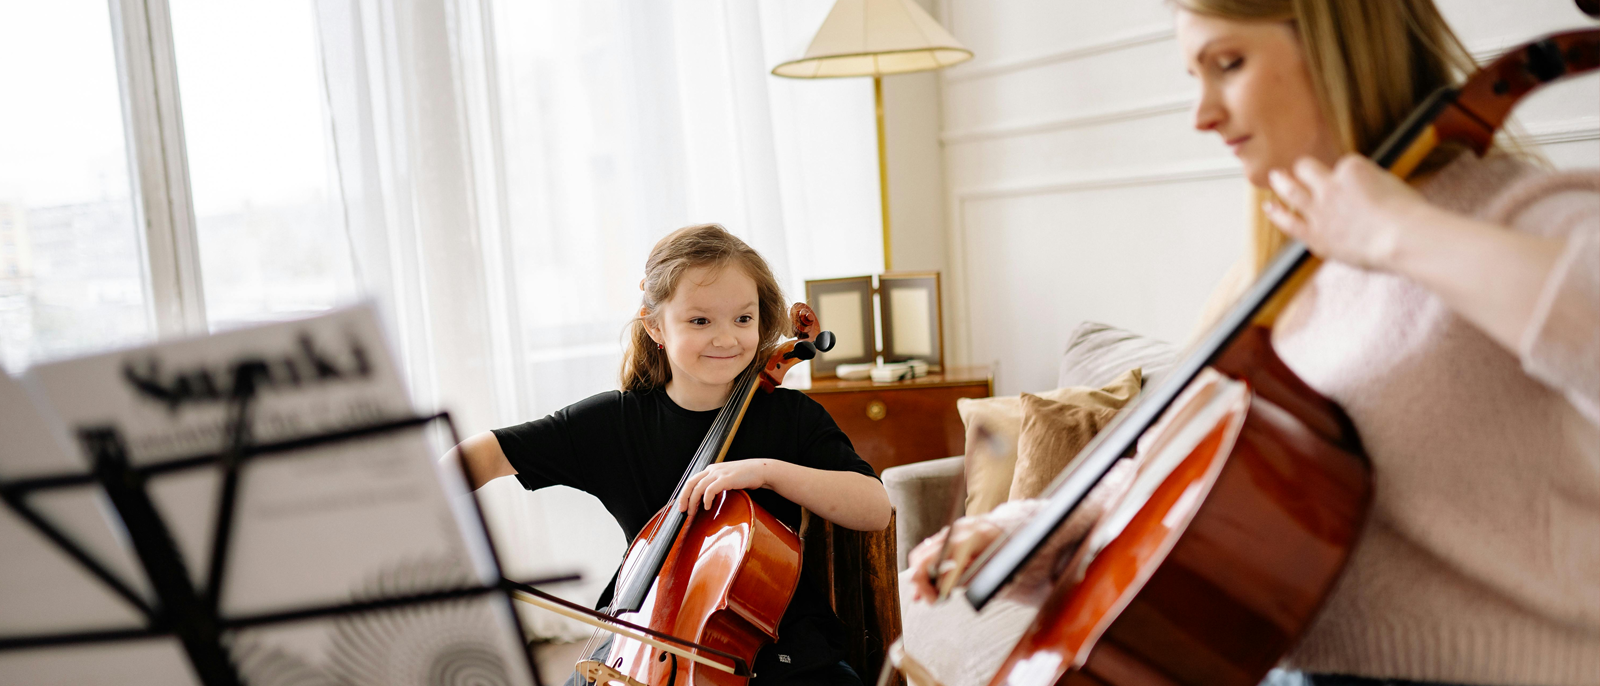 A young music student studies cello with her teacher.